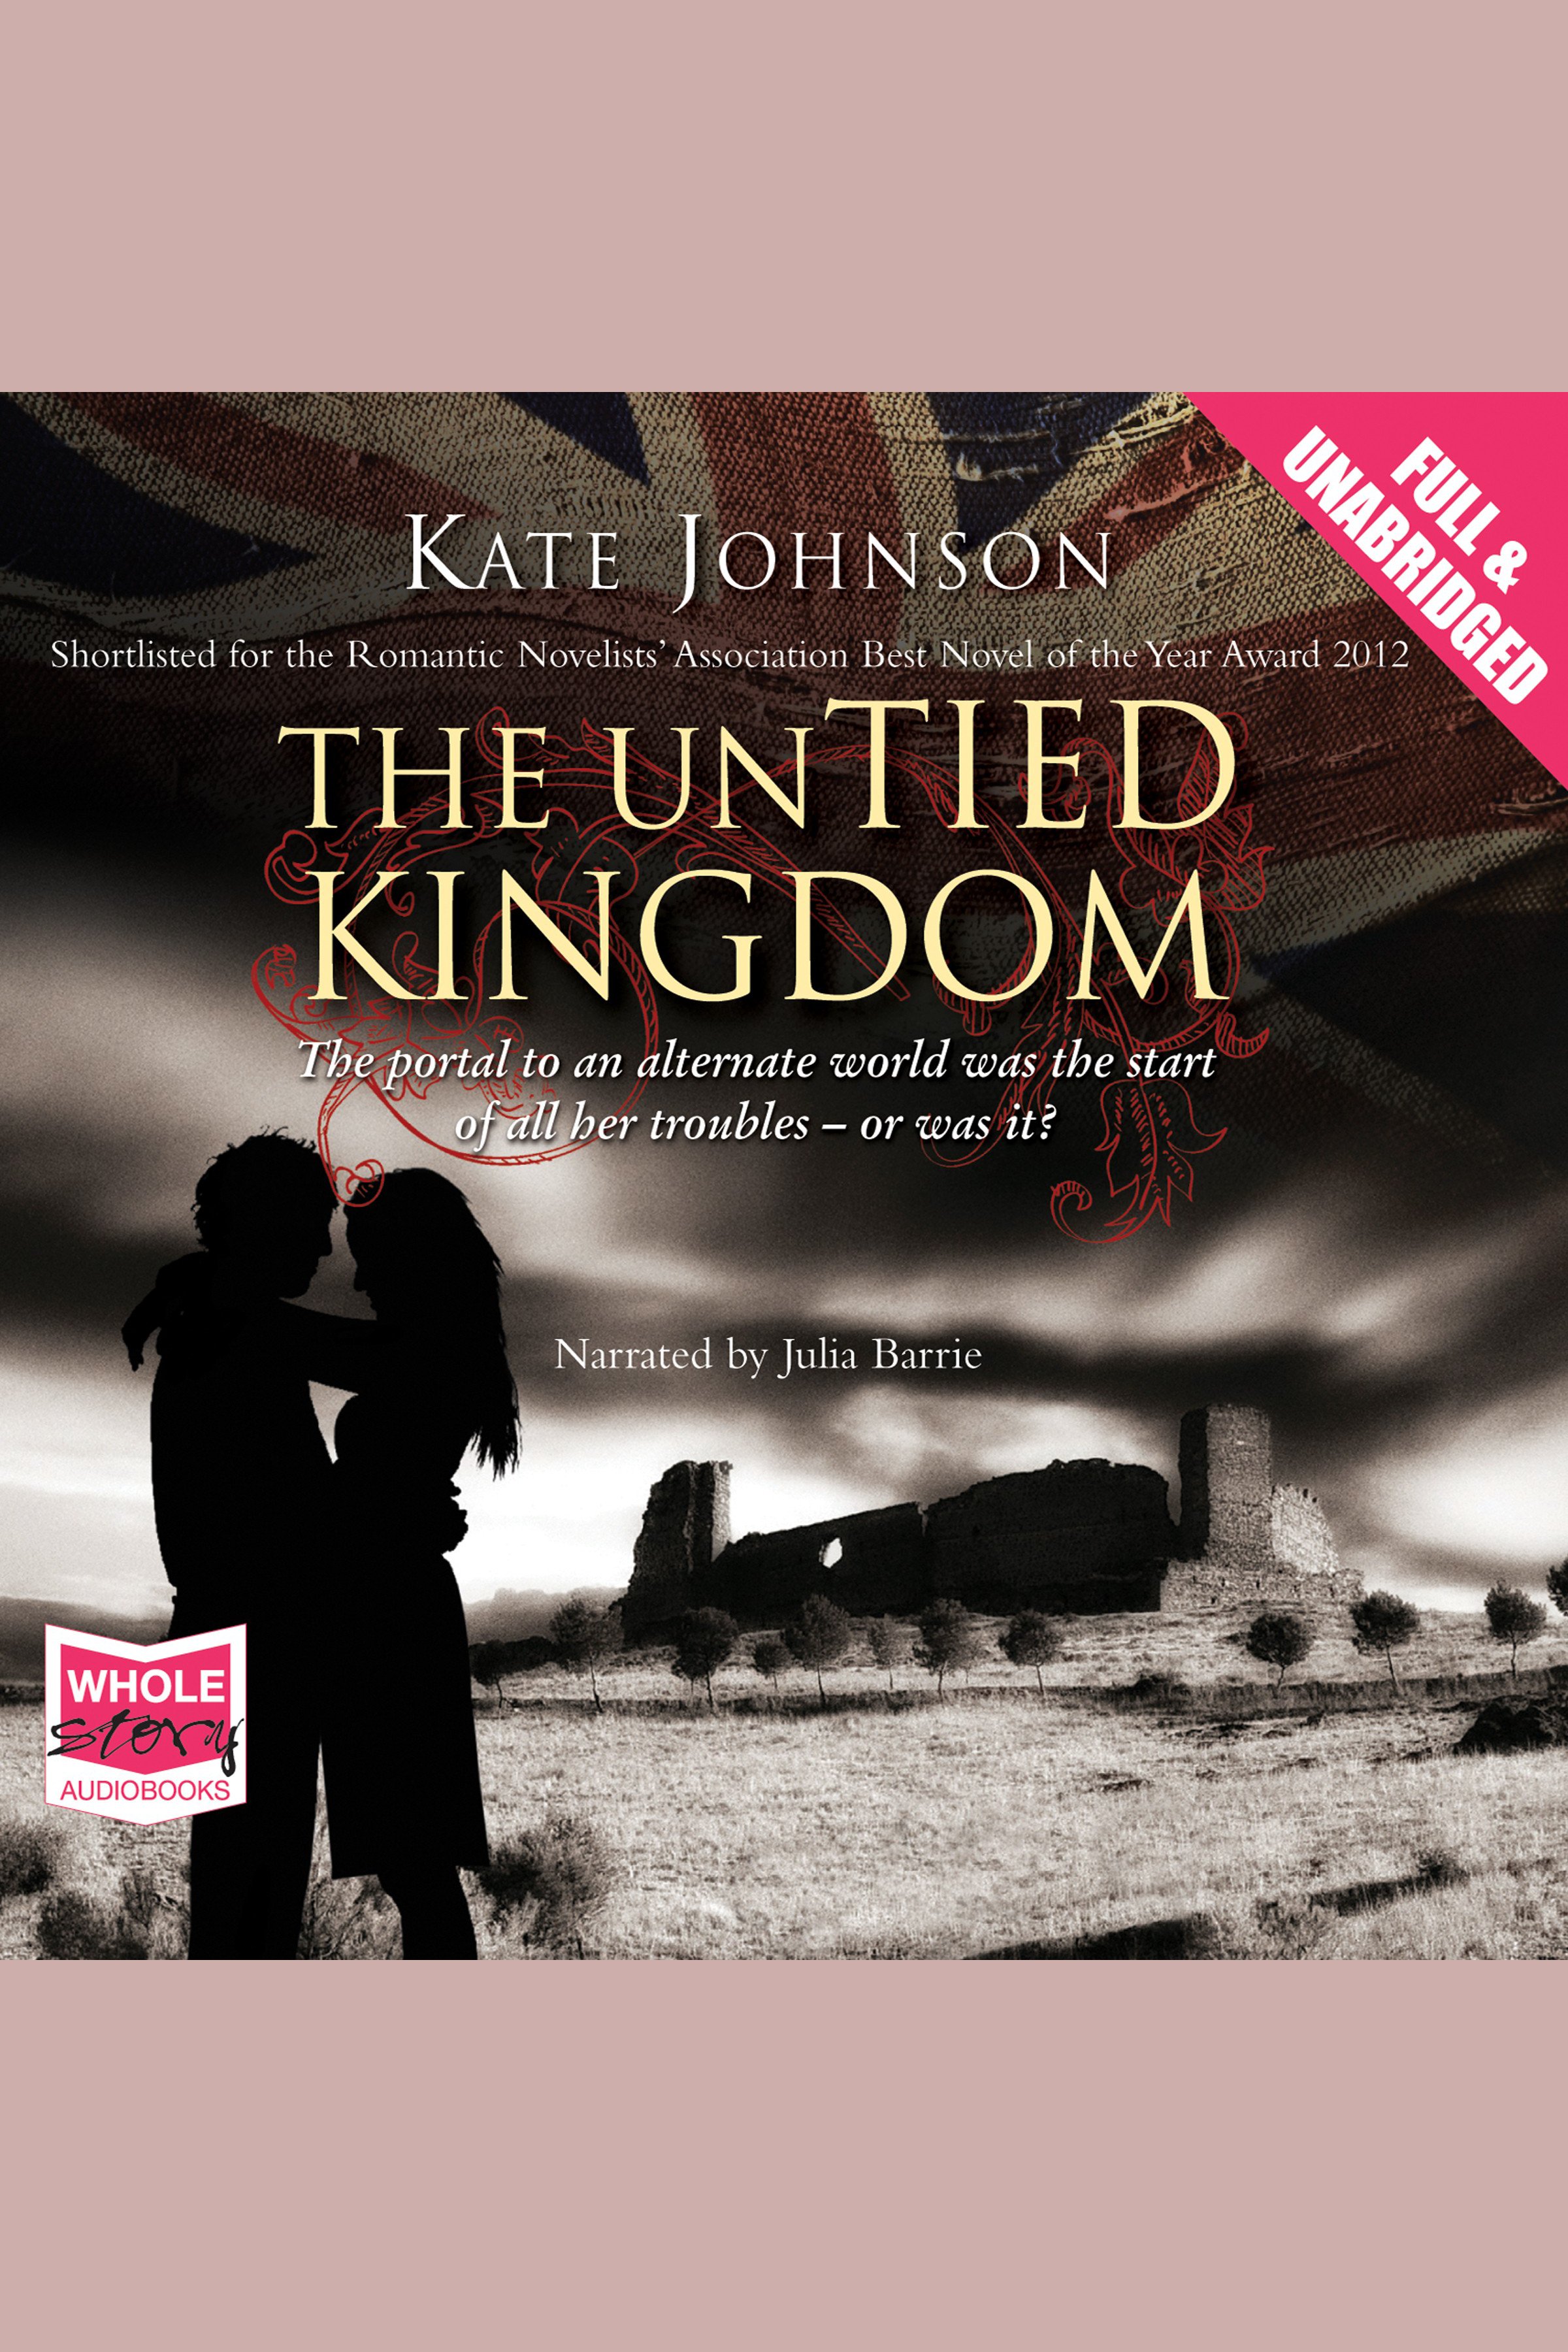 The Untied Kingdom by Kate Johnson pic